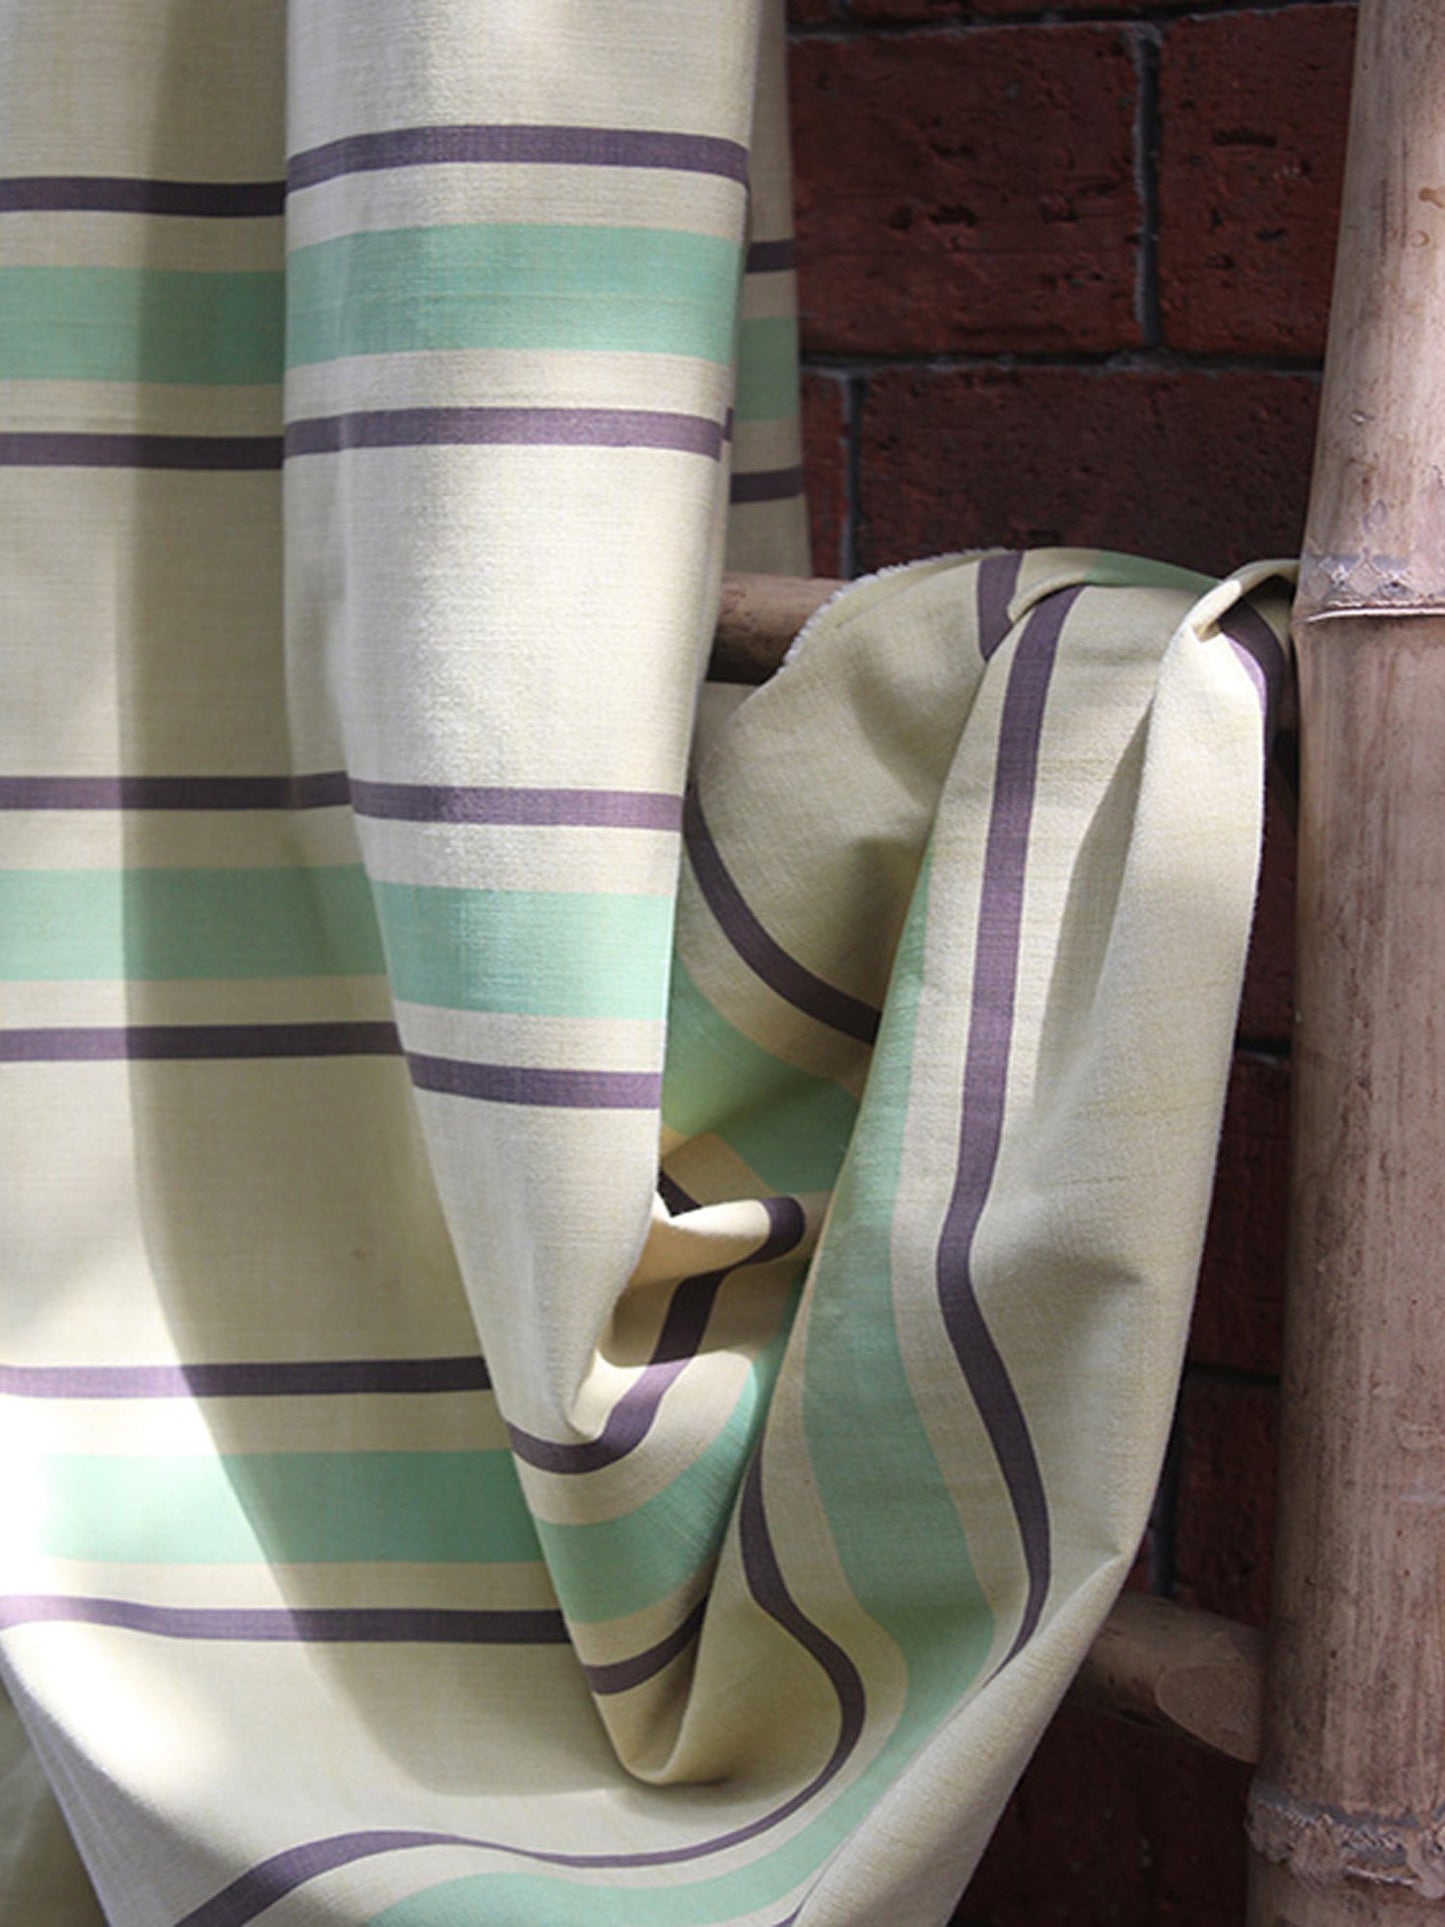 Fabric Cotton Blend Screen Printed Striped 54"